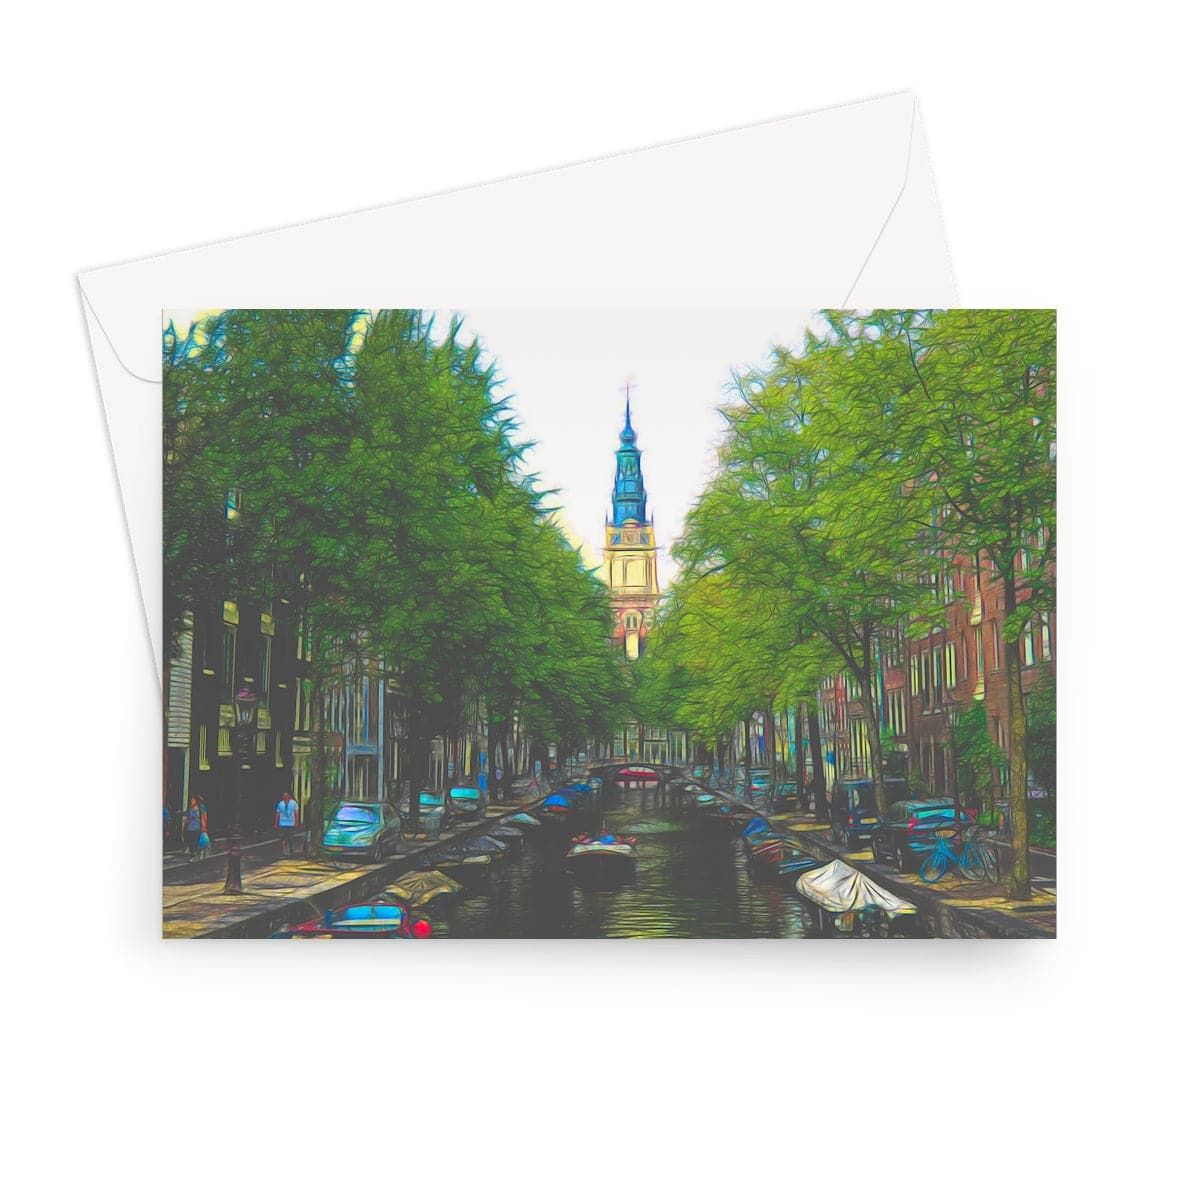 Amsterdam Canal, Art on a Greeting Card, By Sensus Studio